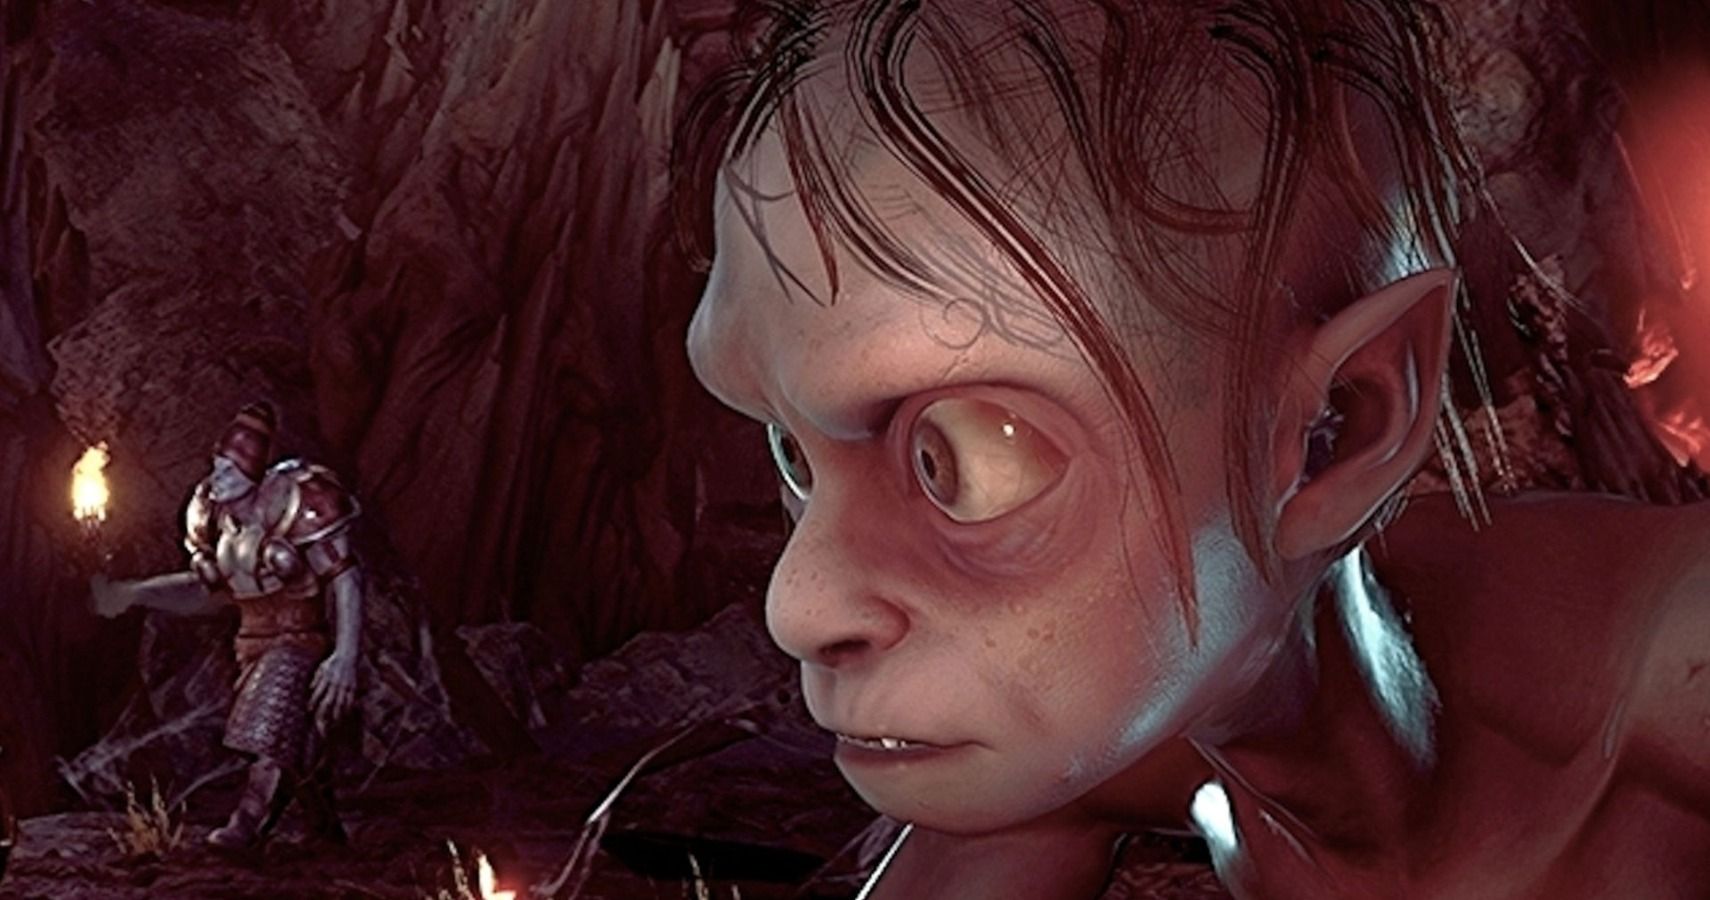 gollum from lord of the rings suit